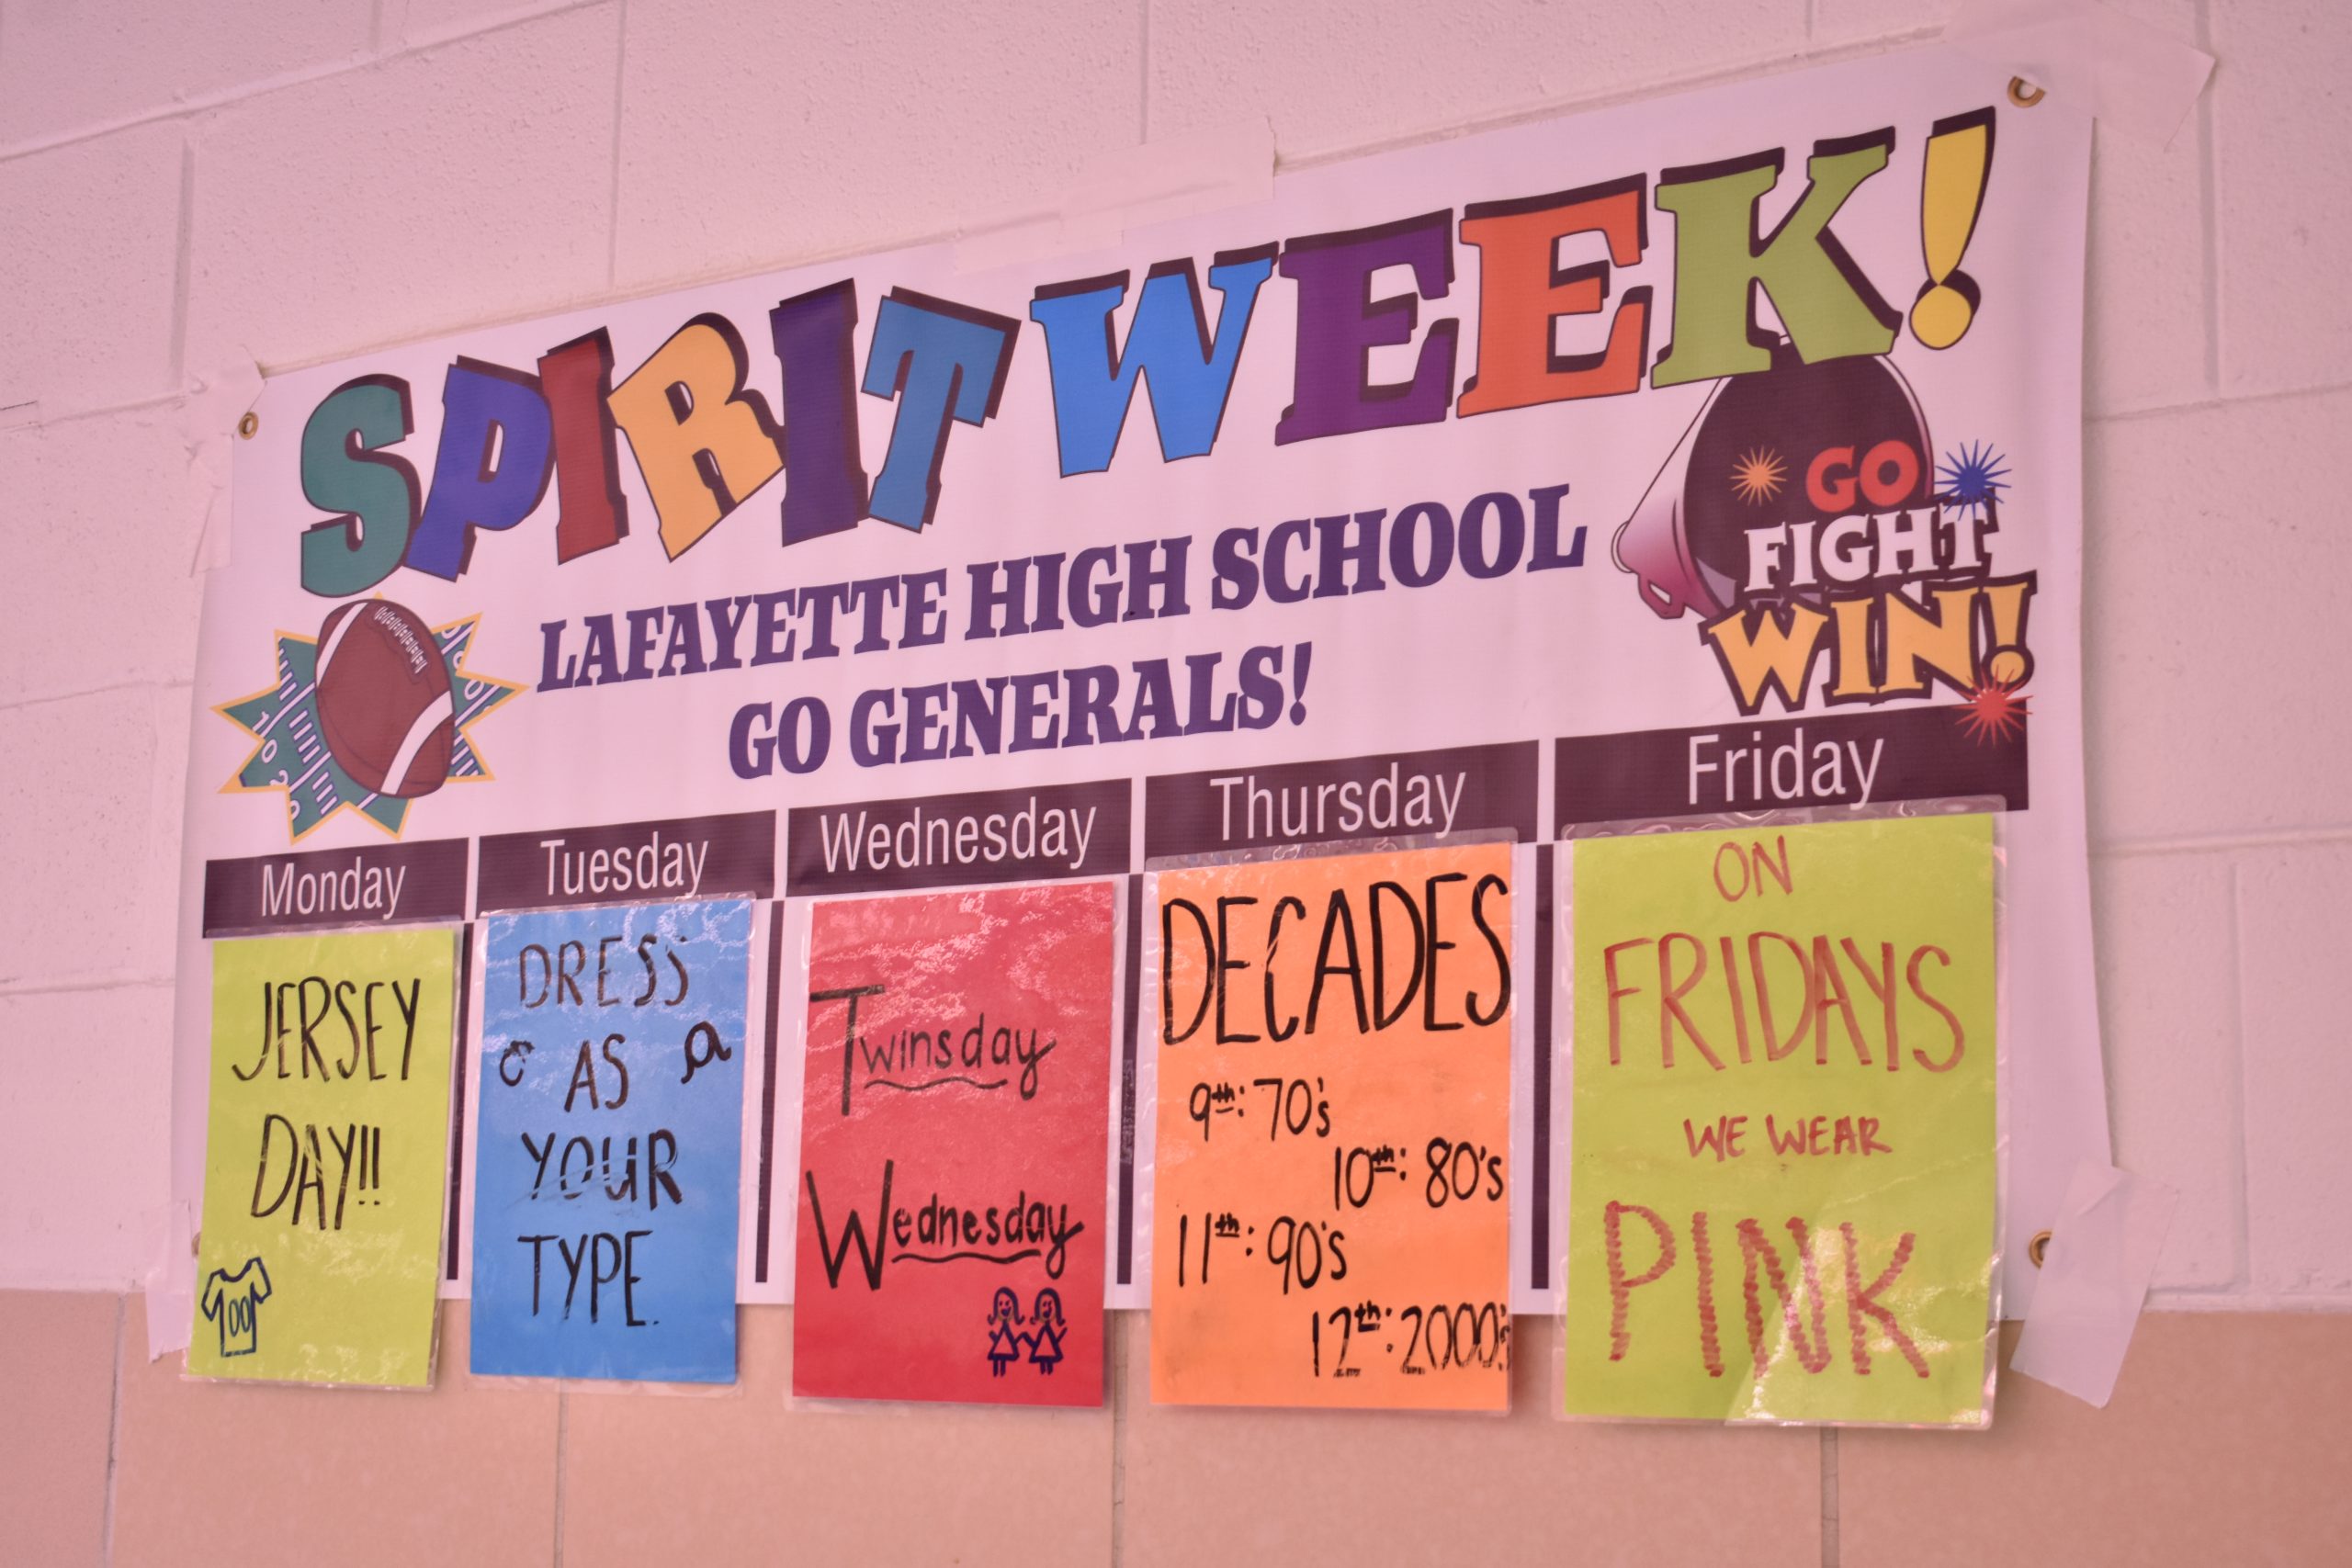 Photograph of Lafayette Homecoming spirit week poster, taken in LHS cafeteria.